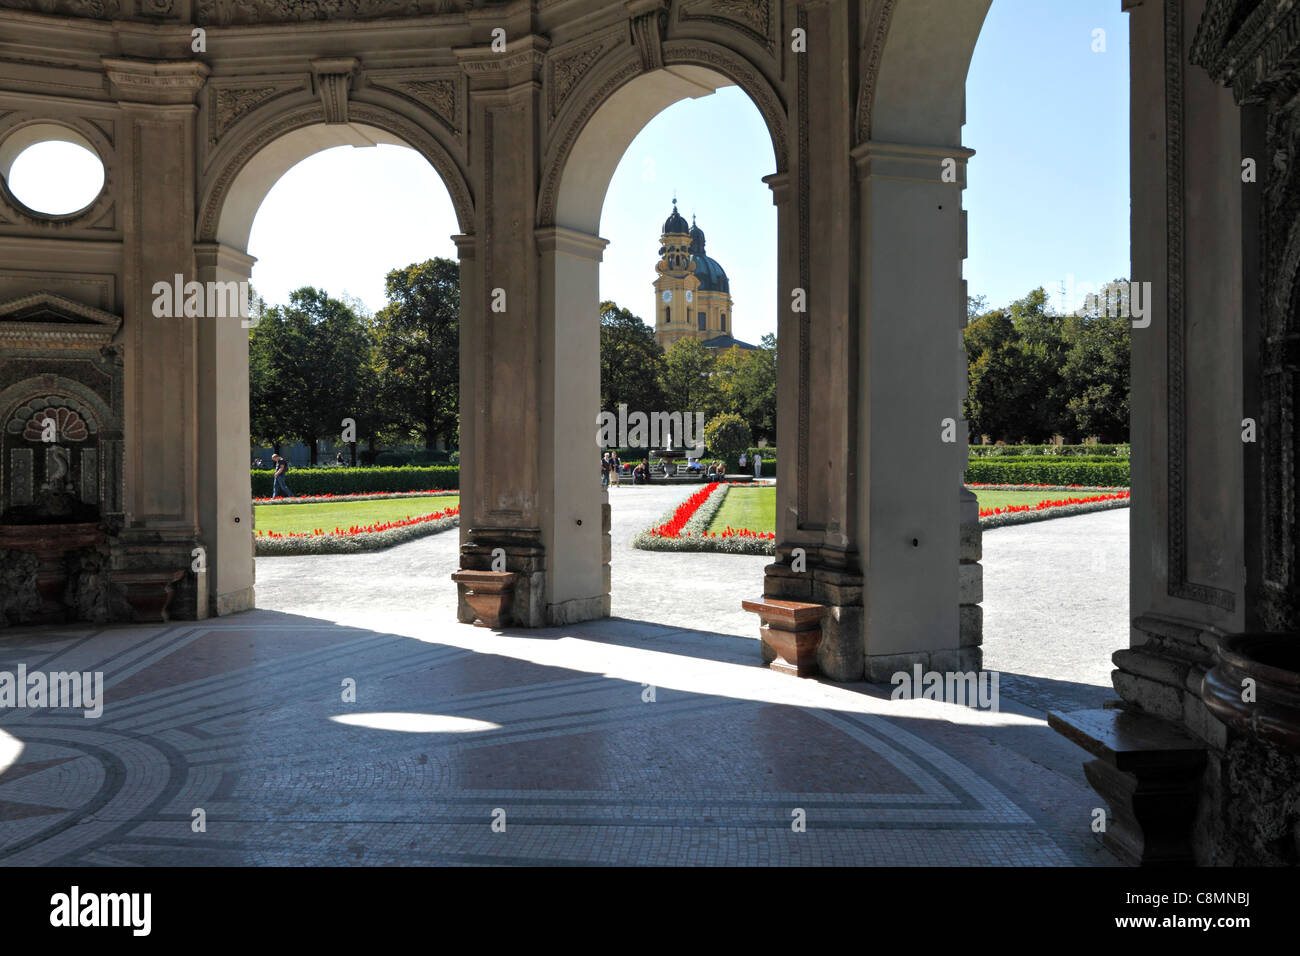 View from inside the Diana Temple to Theatiner Kirche, Hofgarten, Munich Upper Bavaria Germany Stock Photo